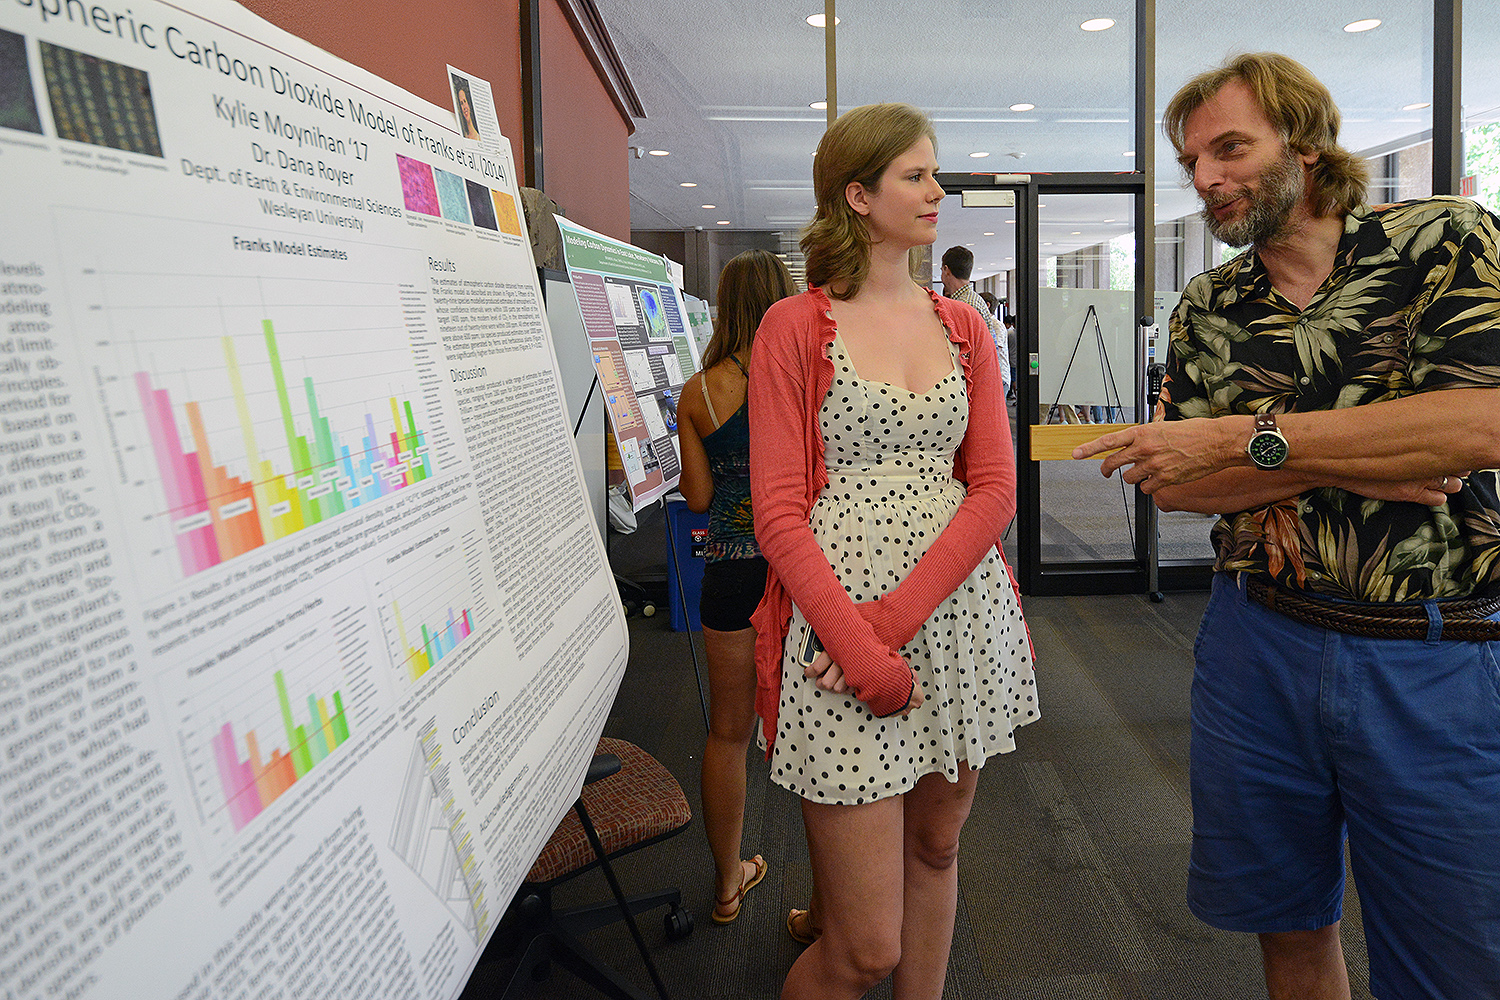 Kylie Moynihan ’17 speaks to Joop Varekamp, the Harold T. Sterns Professor of Earth Science, about her research titled “Testing the Atmospheric Carbon Dioxide Model of Franks et. al.” Franks attempted to develop a new method for modeling atmospheric carbon dioxide. Moynihan’s advisor is Dana Royer, chair and professor of earth and environmental sciences, professor of environmental studies. 